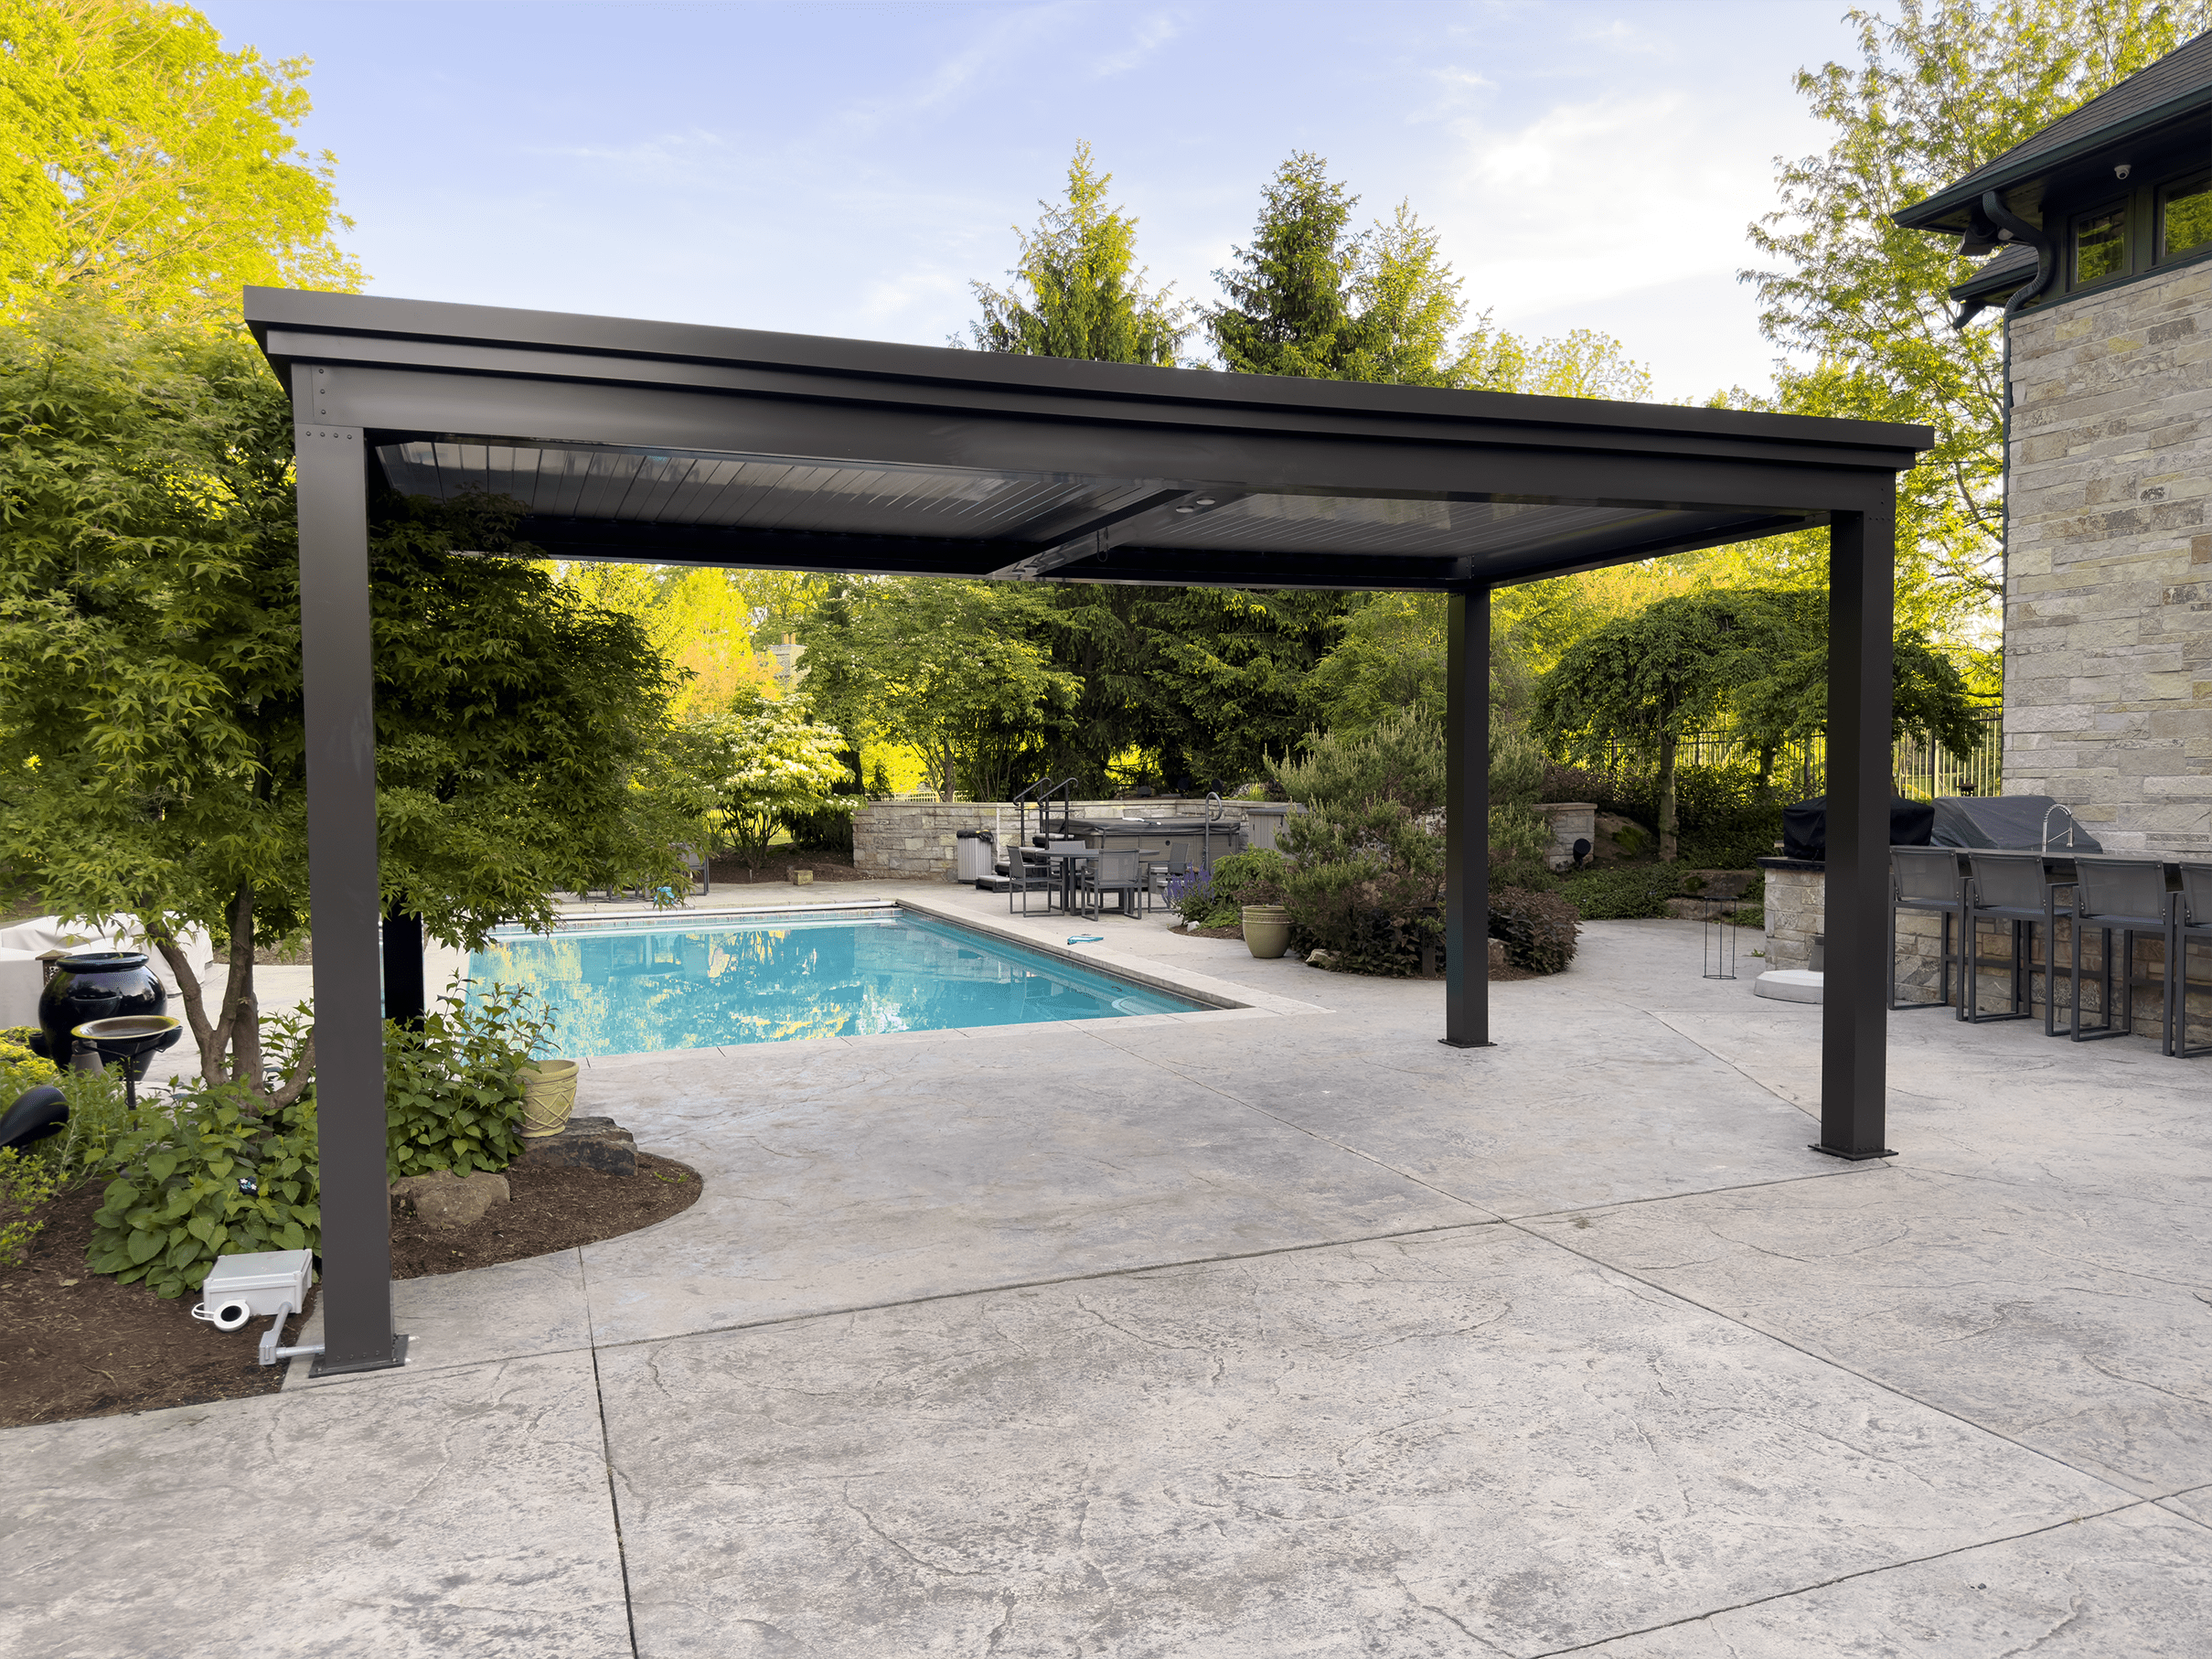 Pergola at house on patio with closed roof